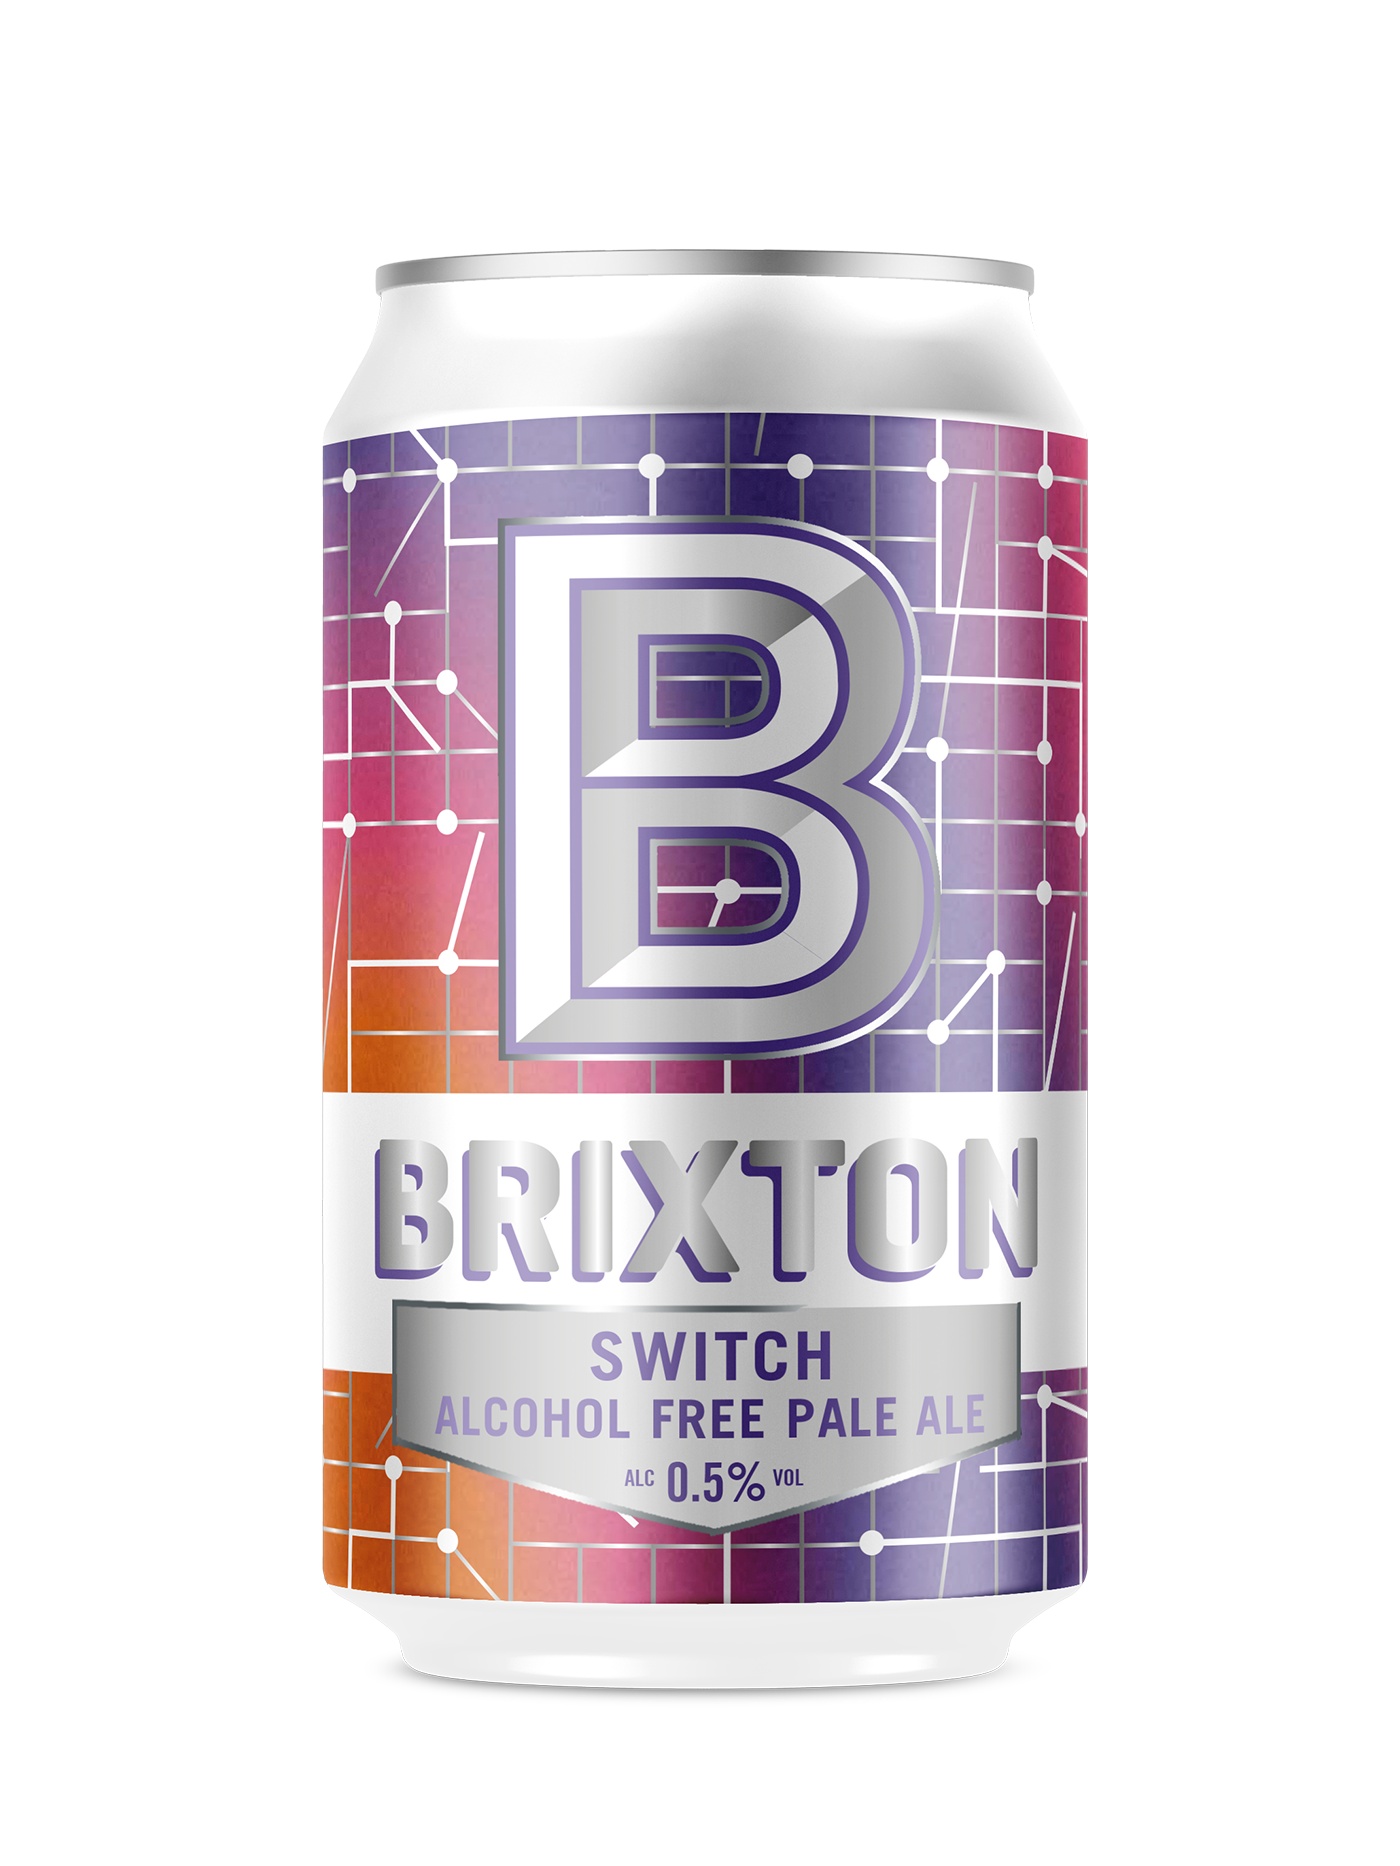 SWITCH - ALCOHOL FREE PALE ALE